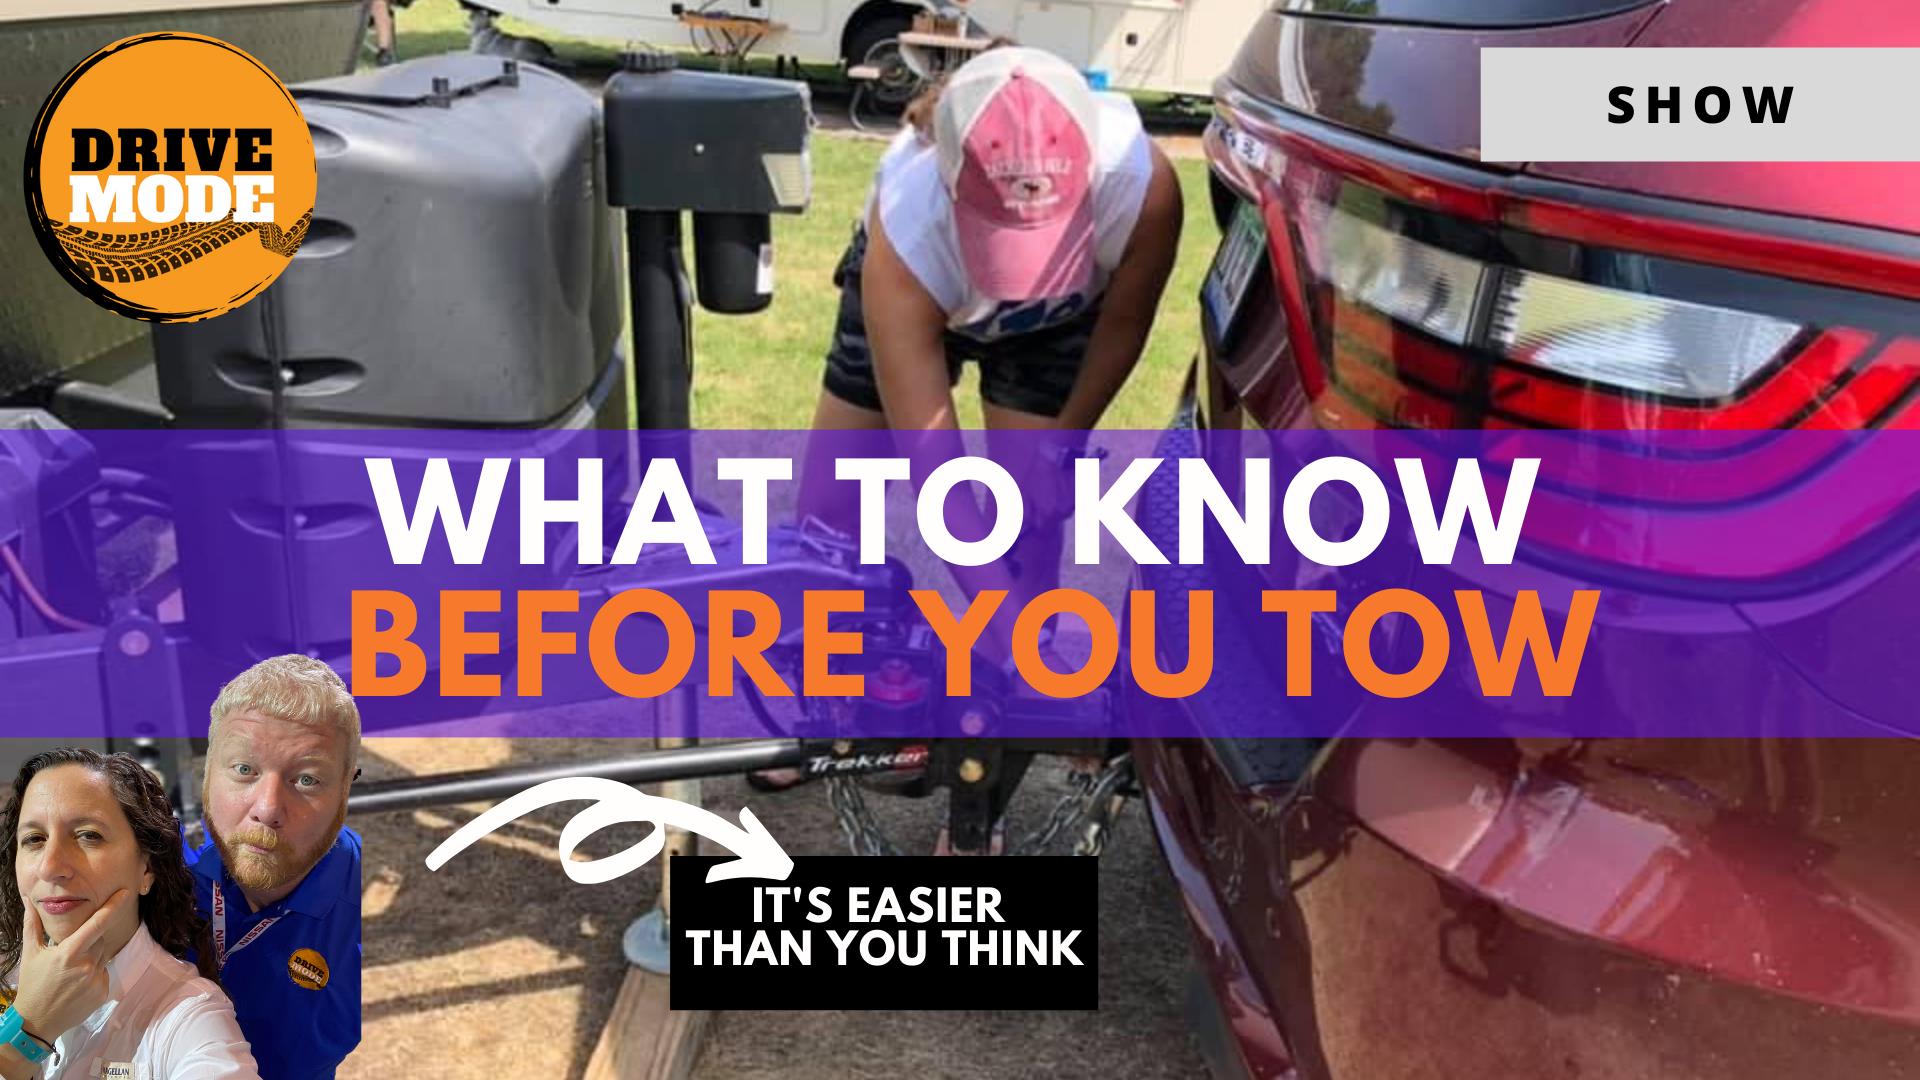 Towing – We Tow, You Tow, We All Tow Trailers!